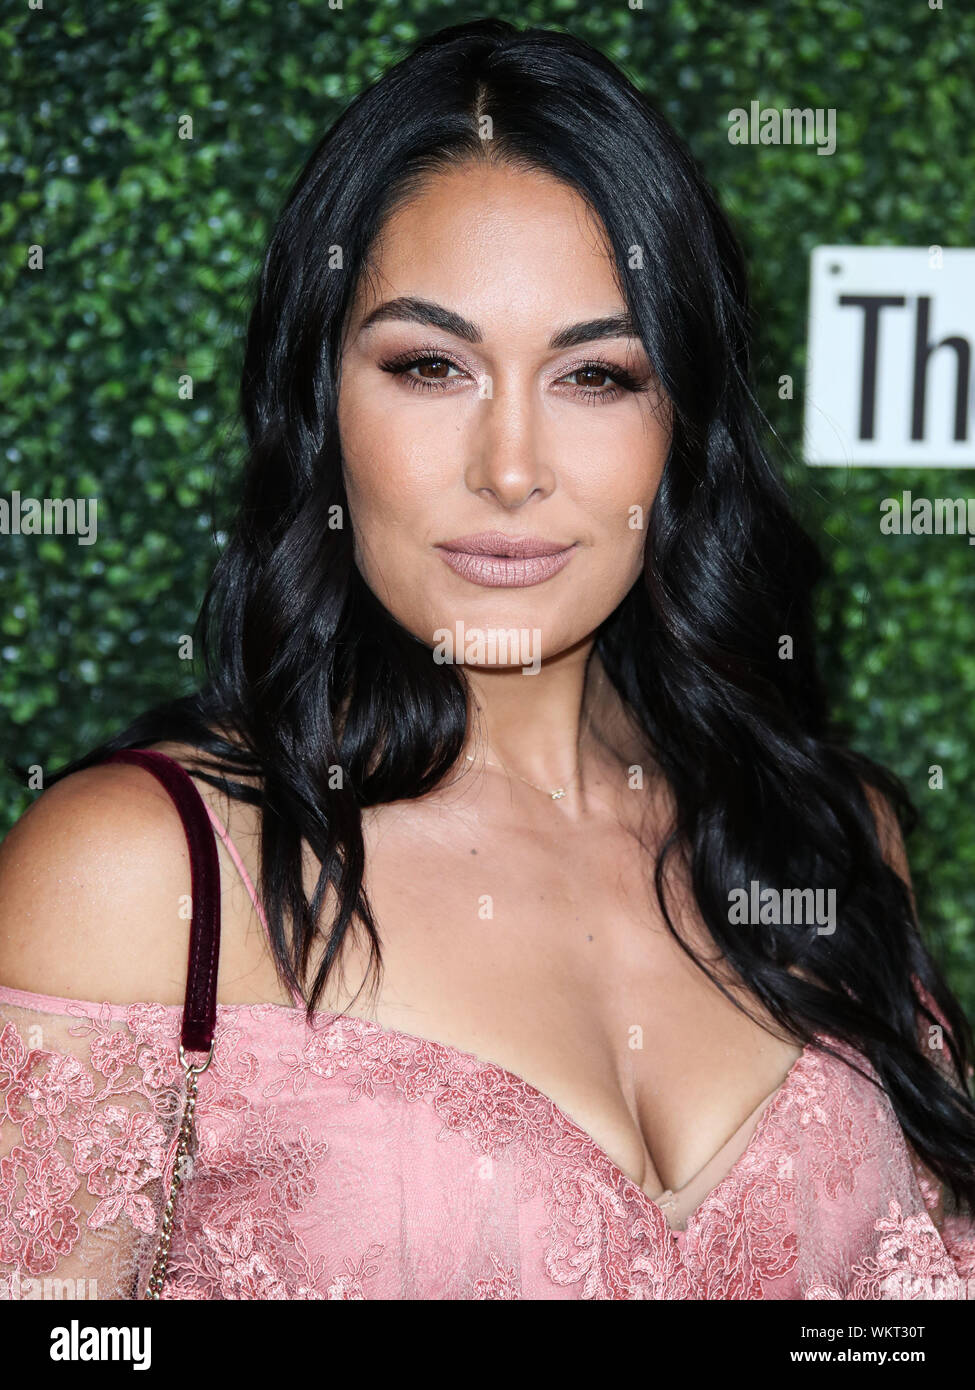 MANHATTAN, NEW YORK CITY, NEW YORK, USA - SEPTEMBER 04: American  professional wrestler Nikki Bella arrives at the 2019 Couture Council  Luncheon Honoring Christian Louboutin held at the David H. Koch Theater